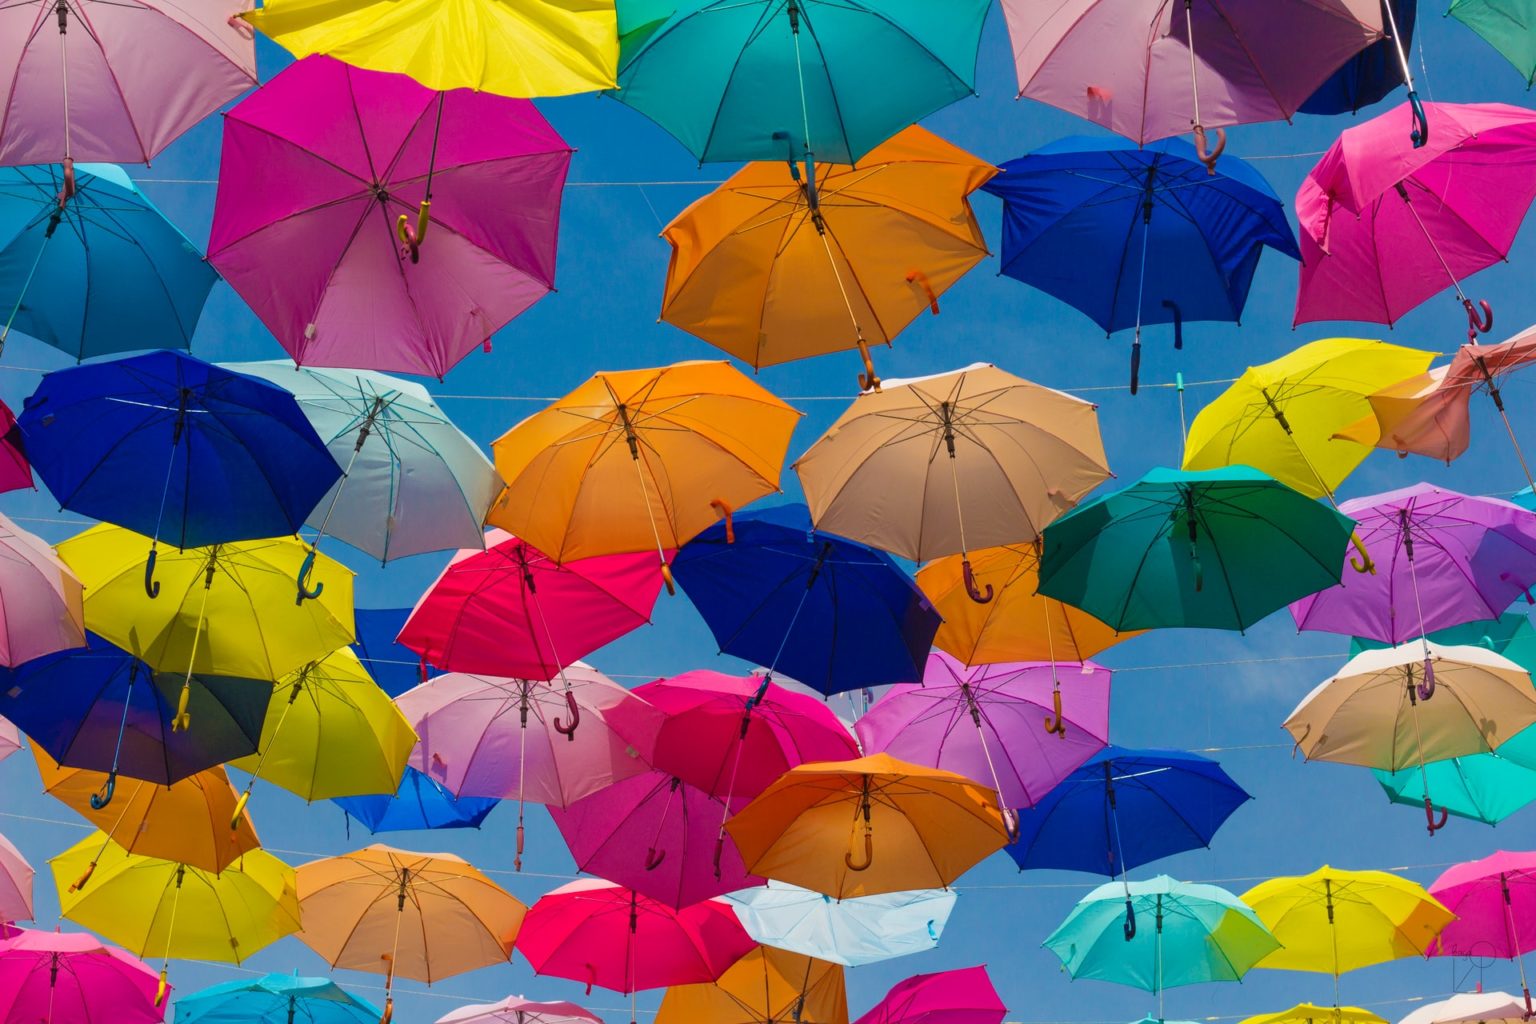 a group of umbrellas in the air